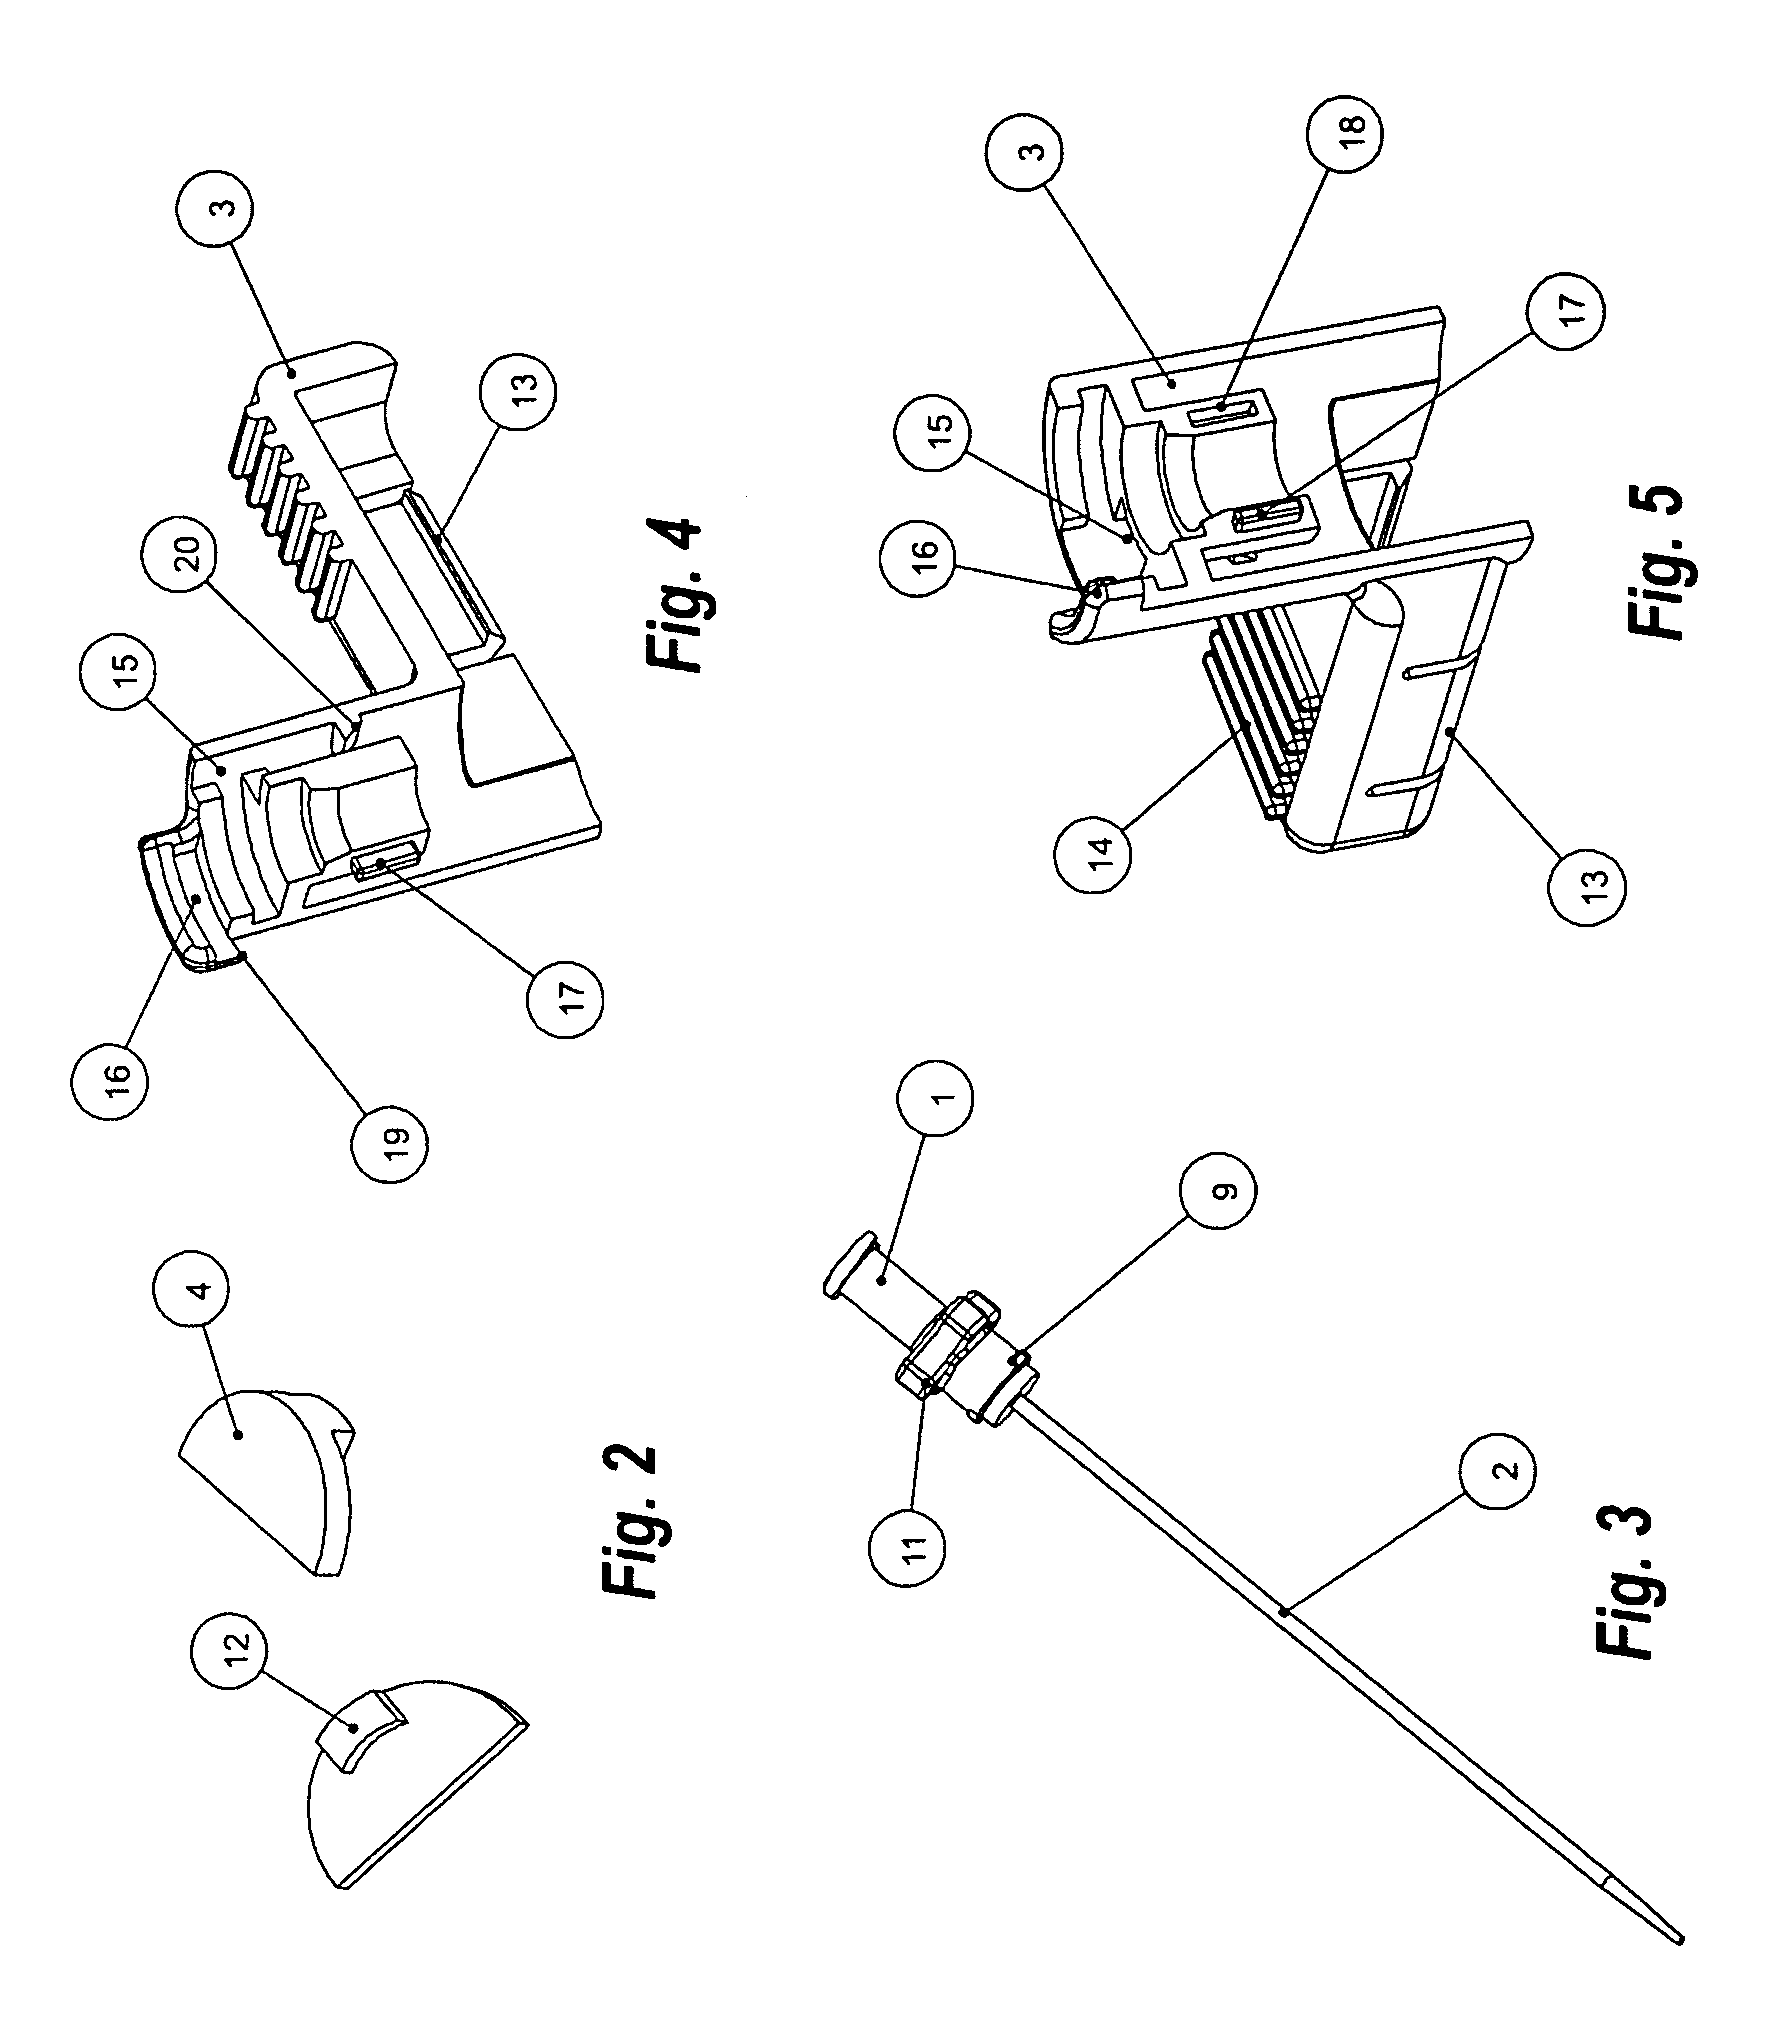 Reduced friction catheter introducer and method of manufacturing and using the same